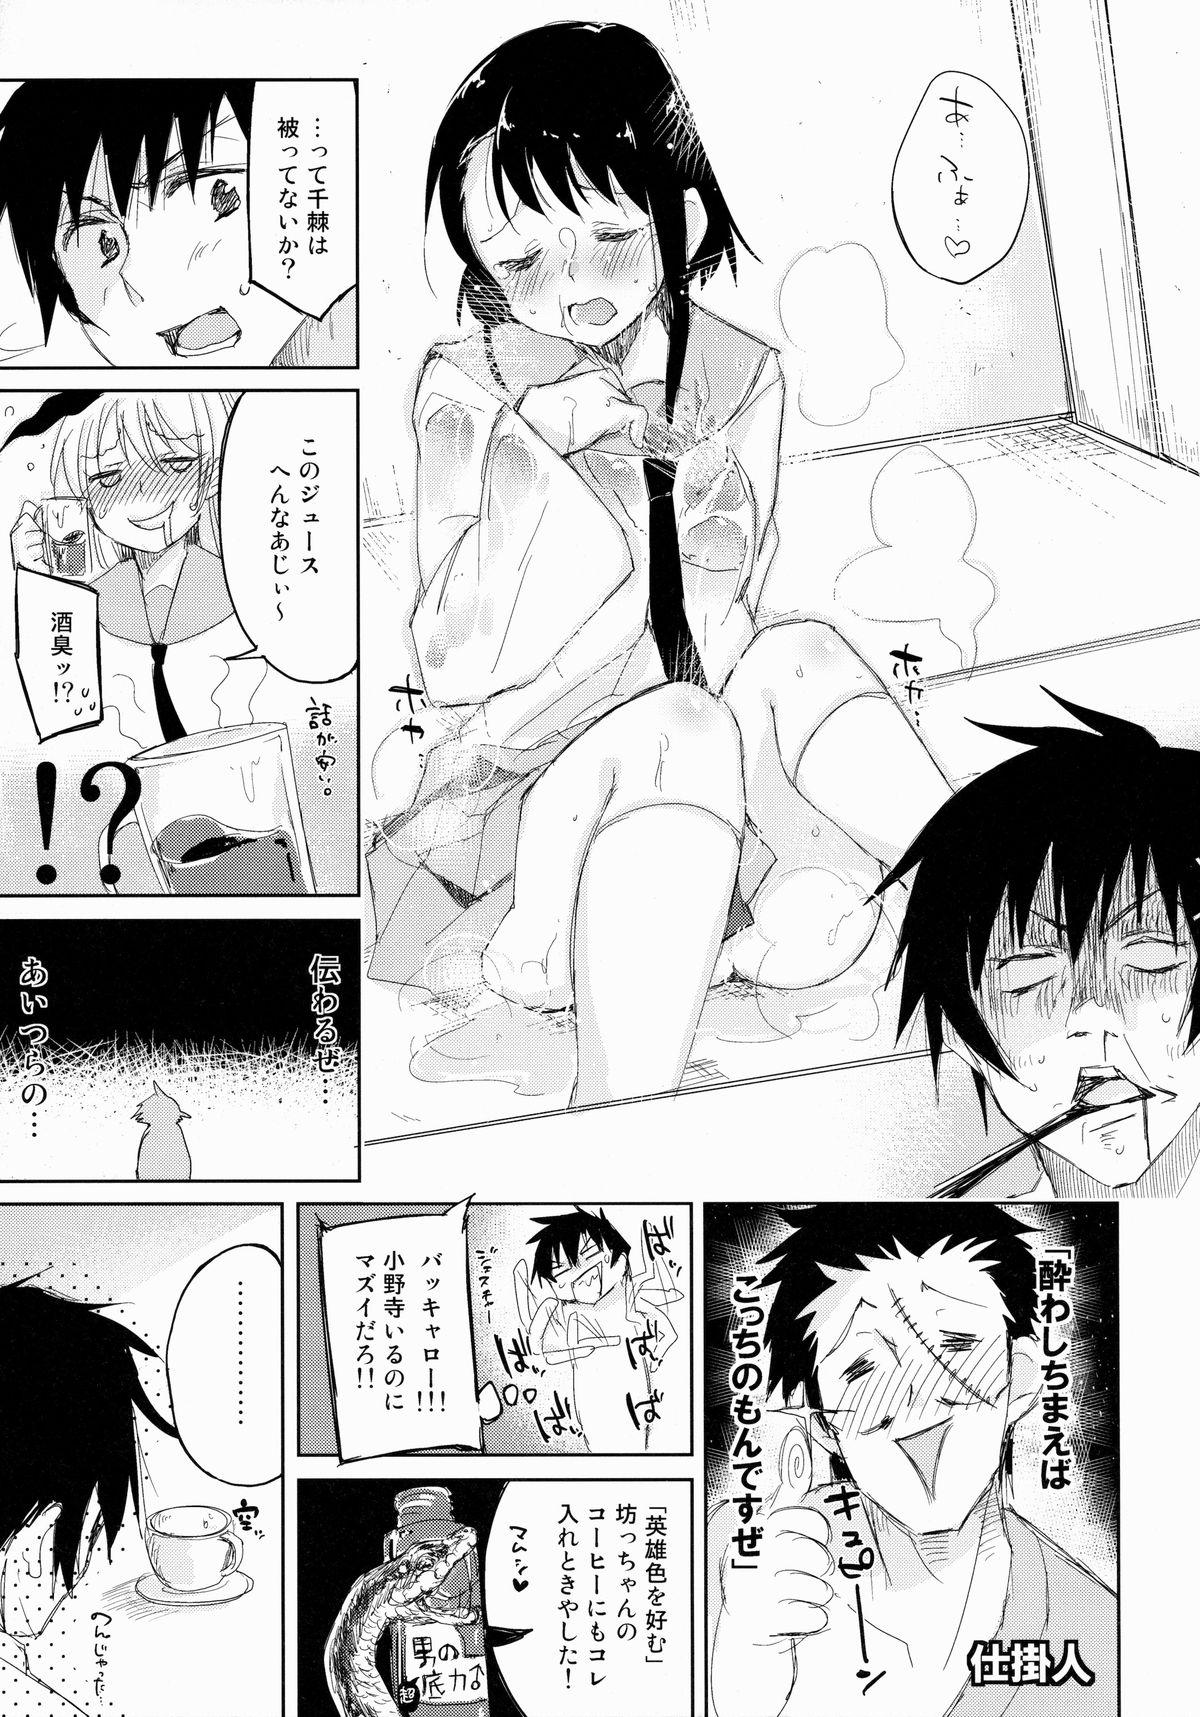 Celebrity Sikkoi Vol.2 - Nisekoi Point Of View - Page 6